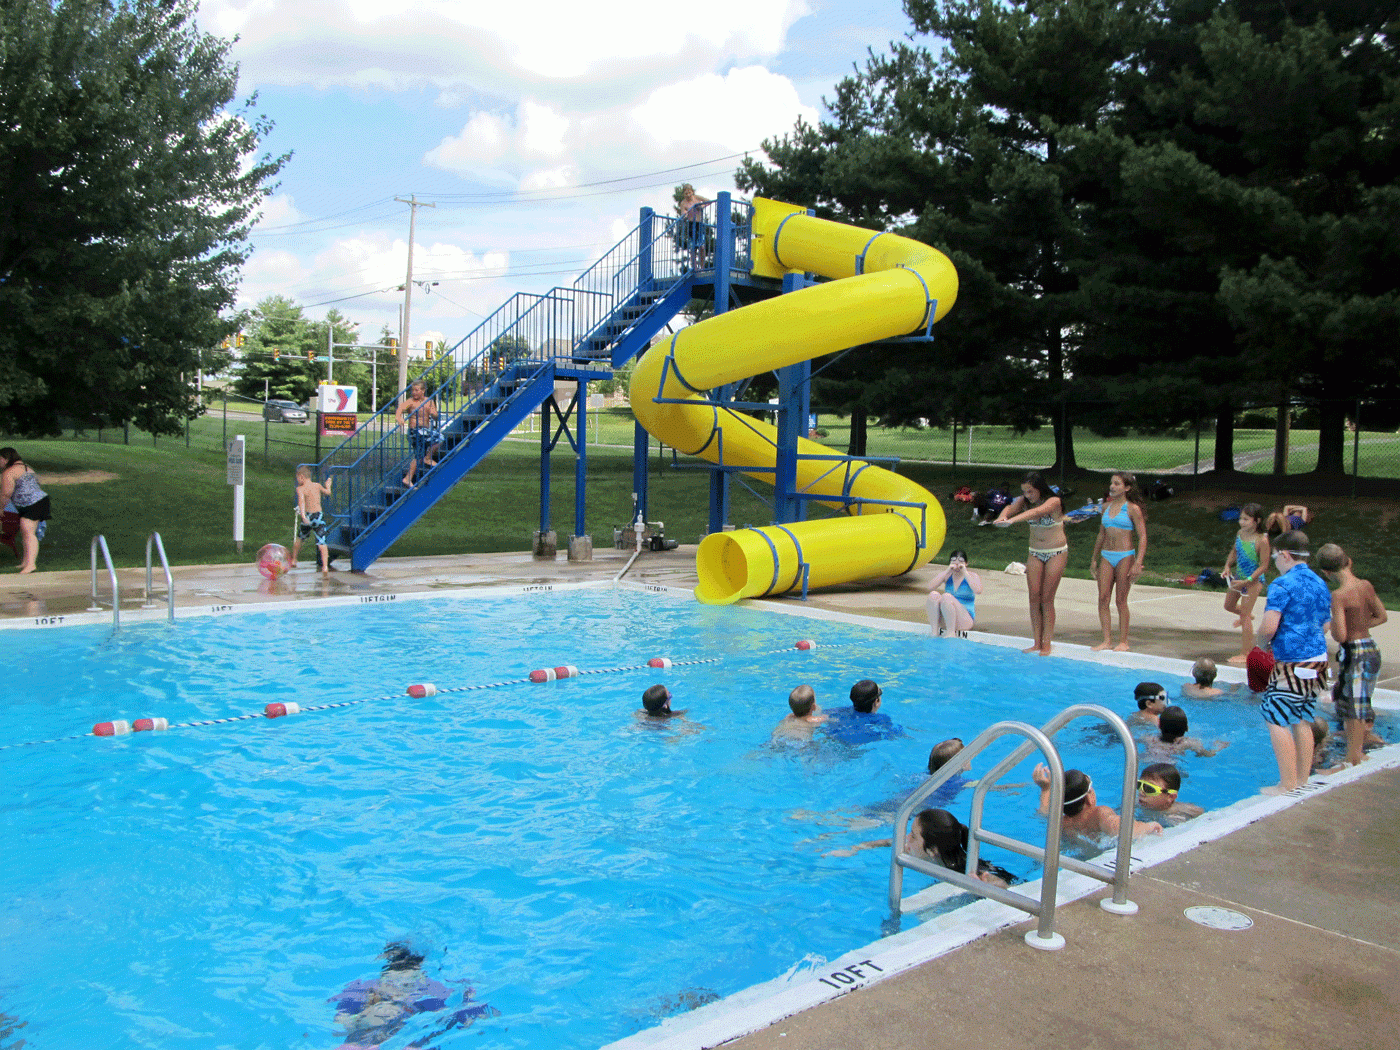 Kids enjoy the outdoor swimming pool and water slide at the Jennersville YMCA in West Grove PA